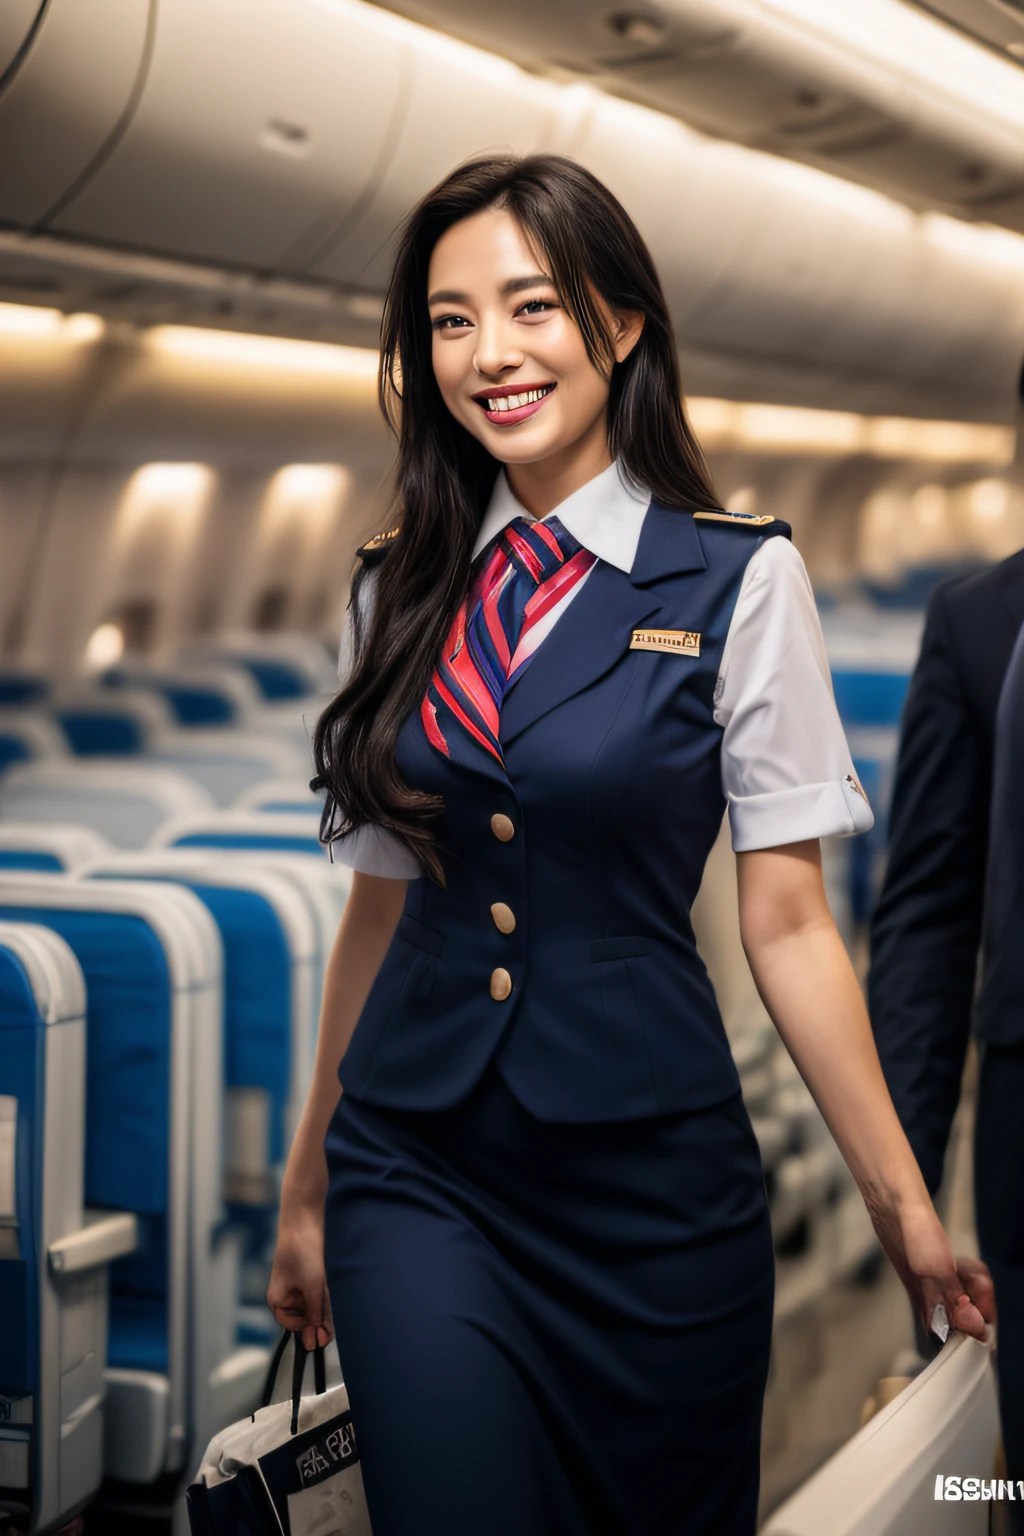 1womanl, 40 years、hyperdetailed face、Detailed lips、A detailed eye、double eyelid、(Black bob hair、Smiling while walking gracefully down the aisle)、(Stewardess uniform:1.2)、(Glamorous body)、(Colossal tits)、thighs thighs thighs thighs, Perfect fit, Perfect image realism, Background with: (Business Class aisle on airplanes:1.2), Cowboy Shot, In-depth background, detailed costume, Perfect litthing、Hyper-Realism、(Photorealsitic:1.4)、8K maximum resolution, (​masterpiece), ighly detailed, Professional